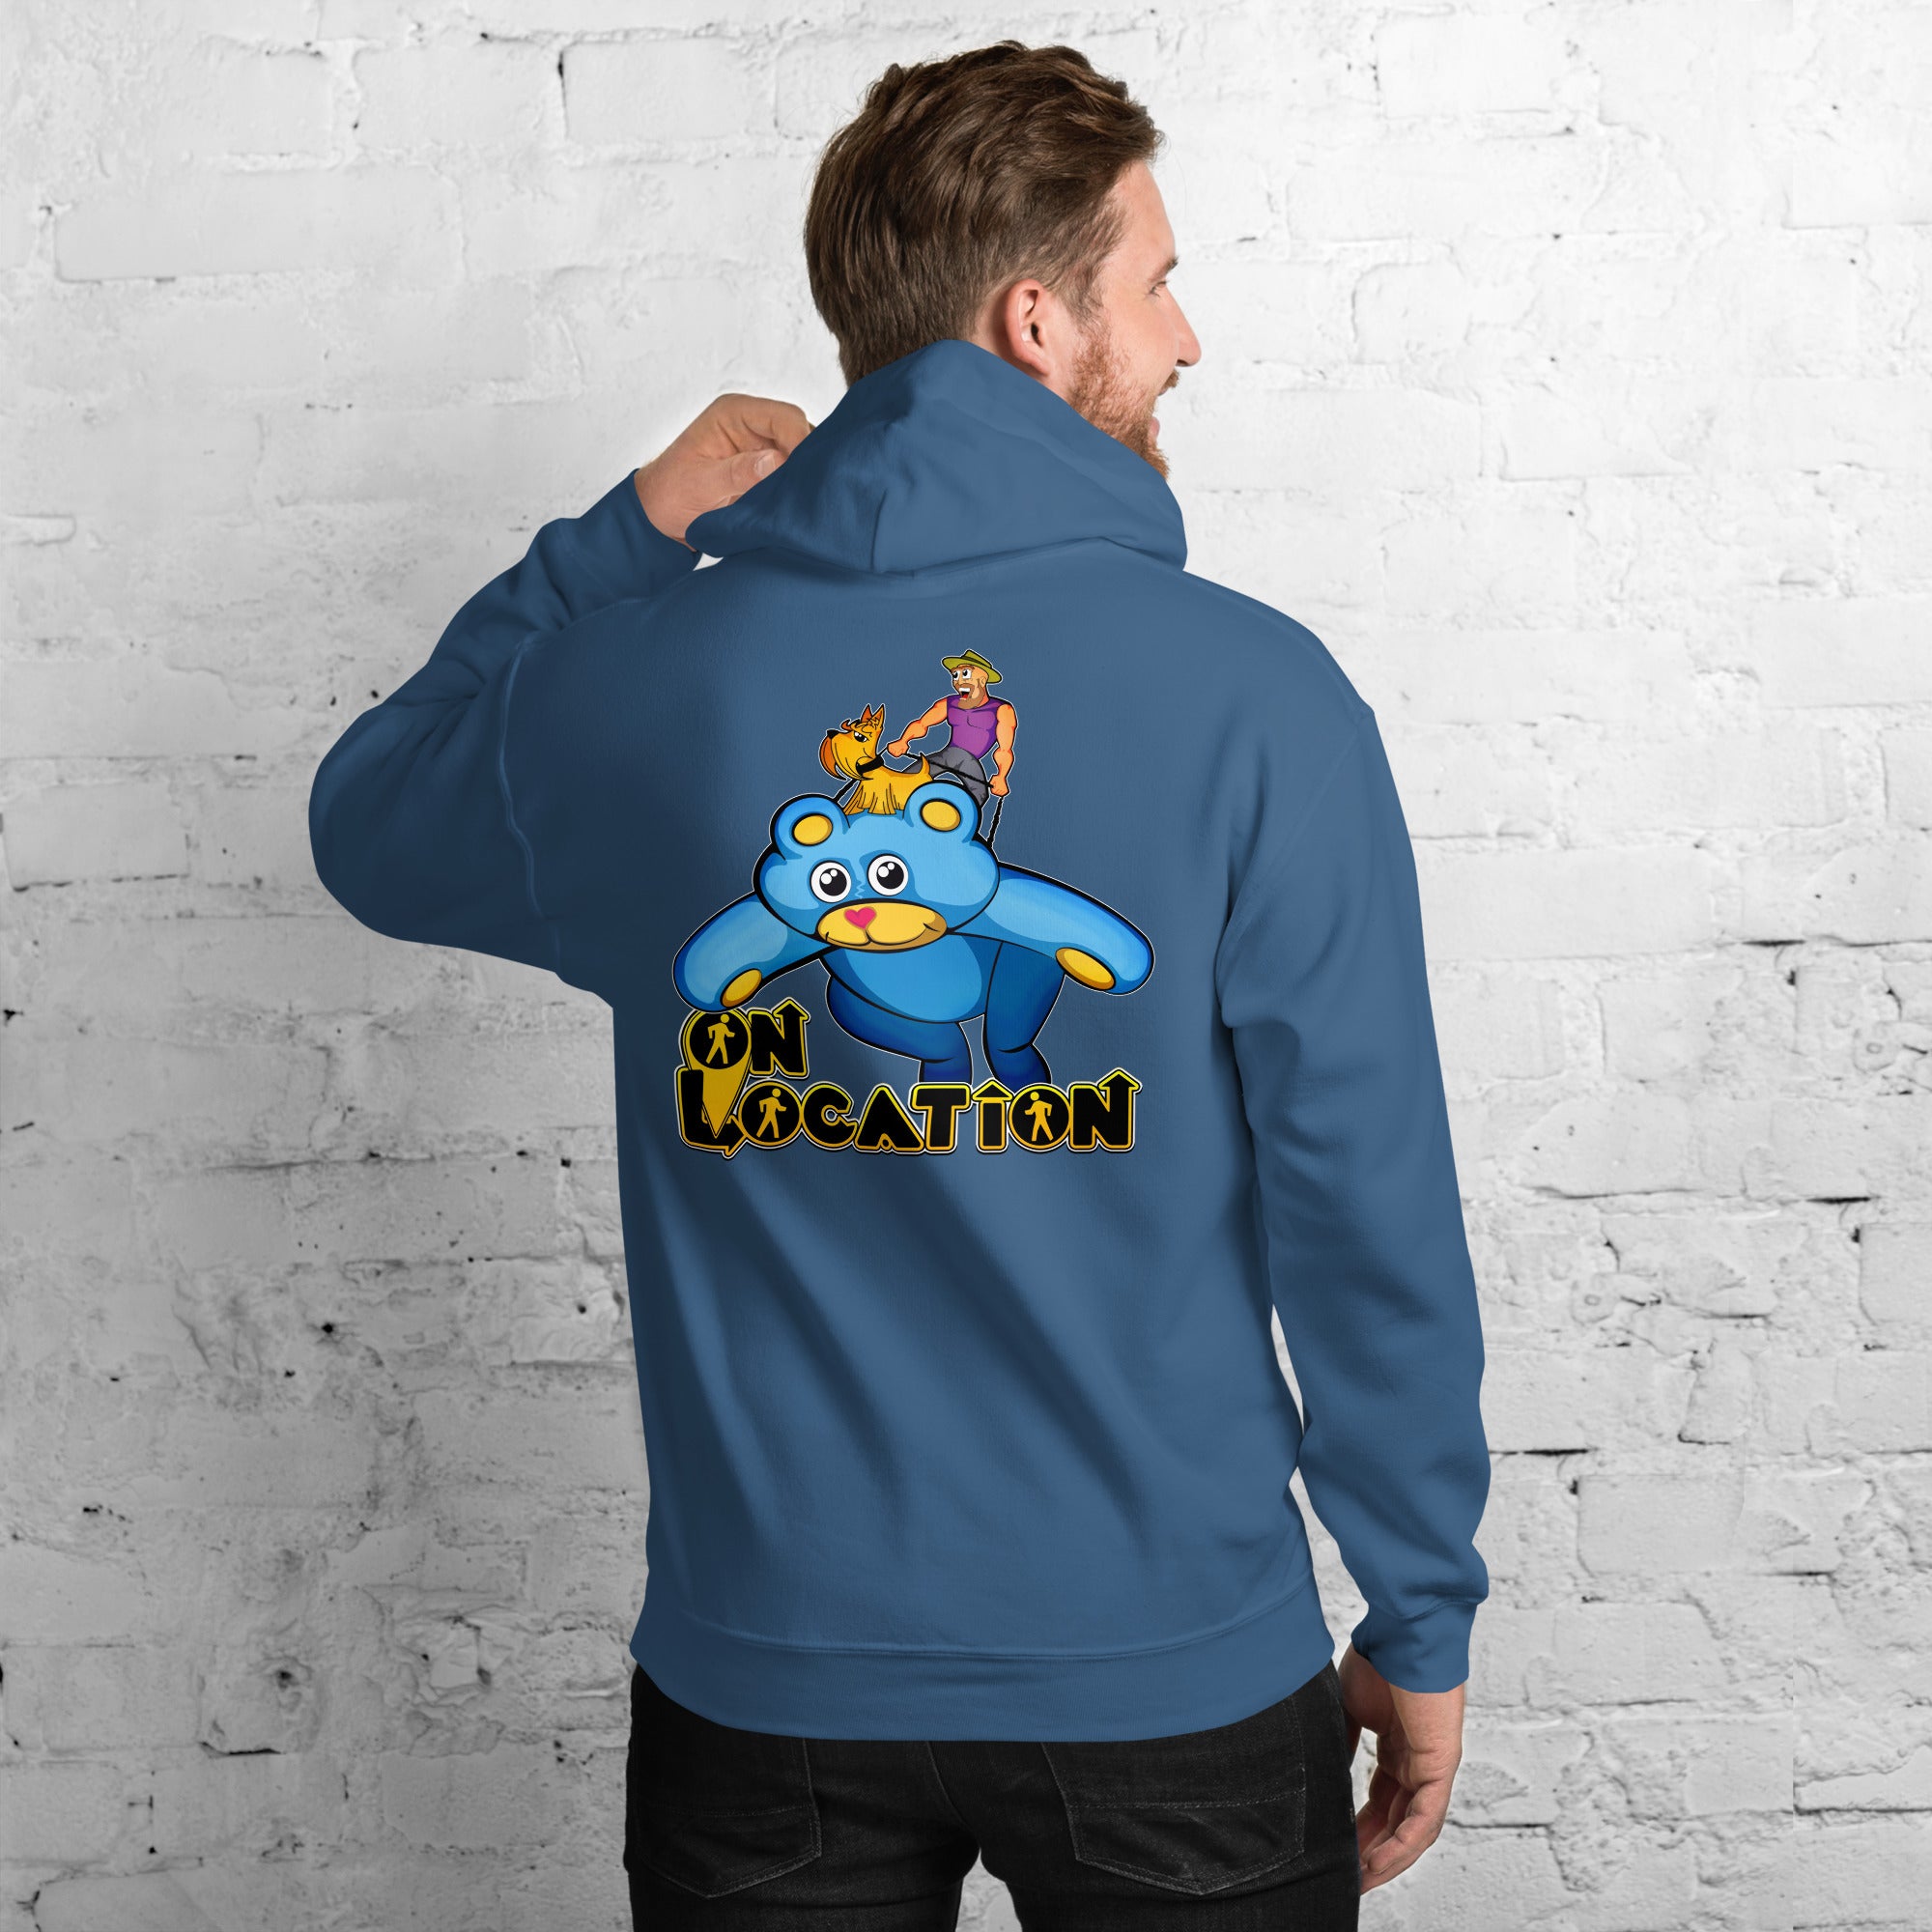 Giant Kite Flying Unisex Hoodie - Back Graphic (multiple colors)